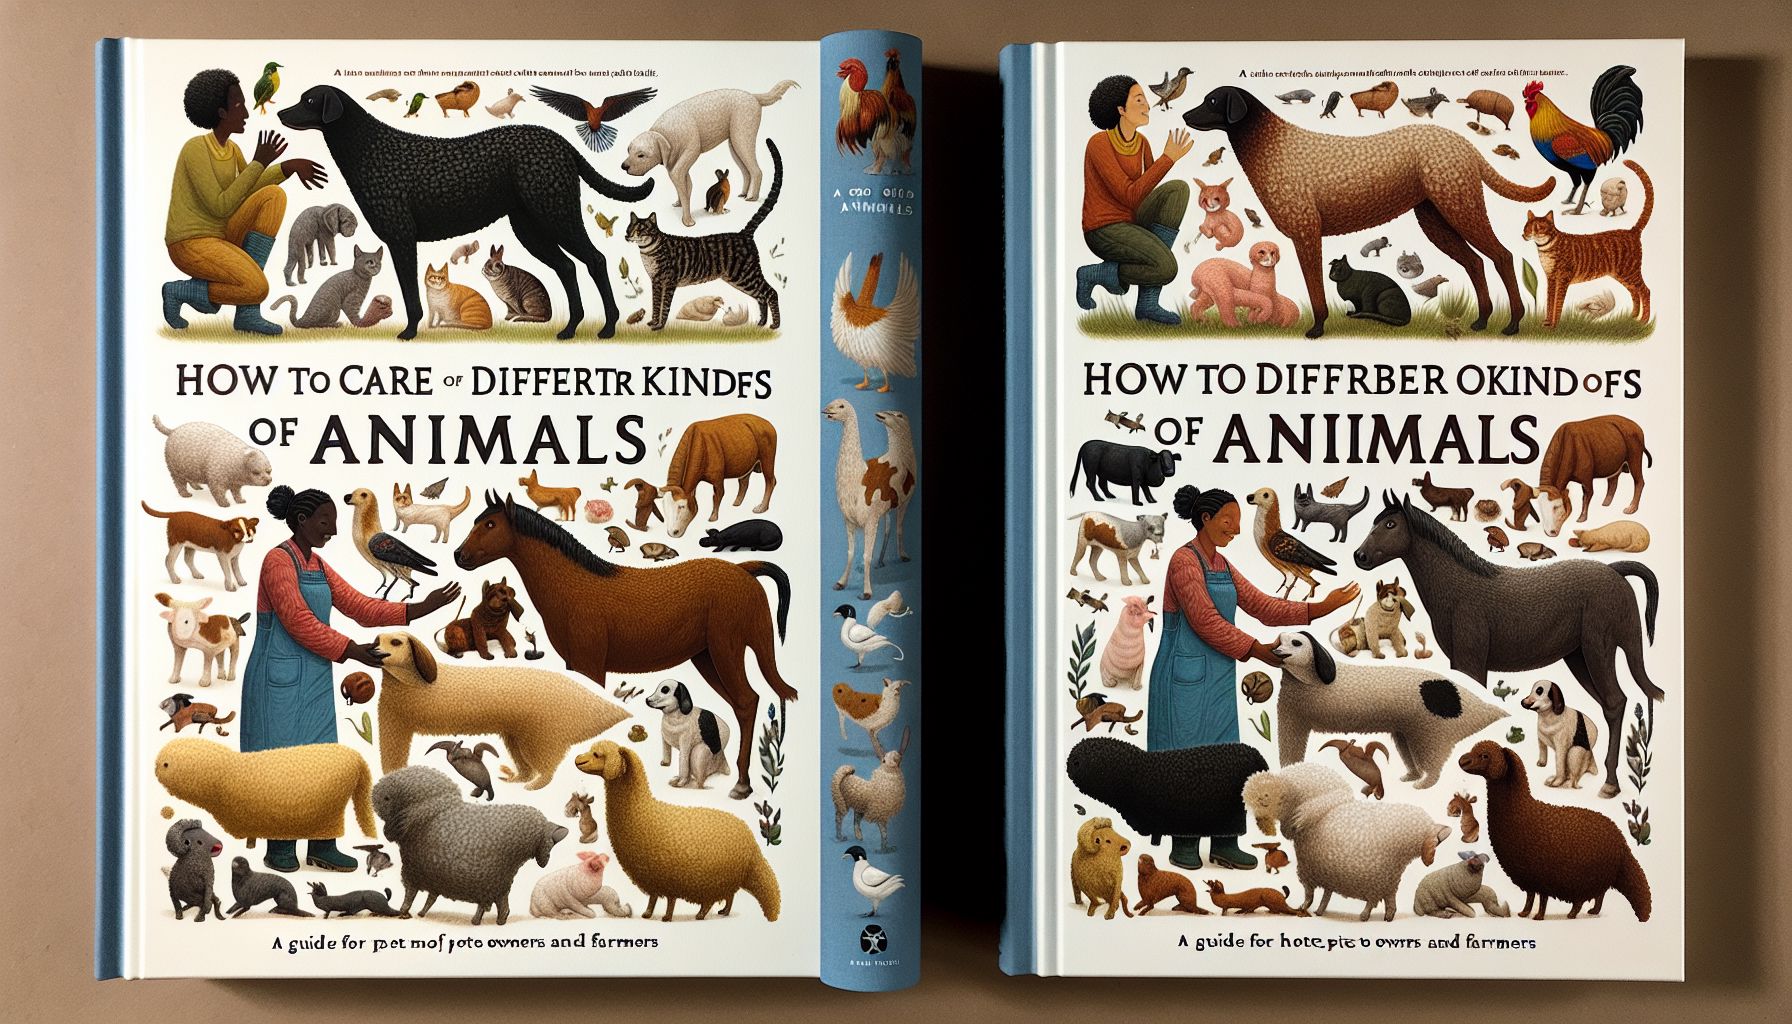 How to Care for Different Kinds of Animals: A Guide for Pet Owners and Farmers